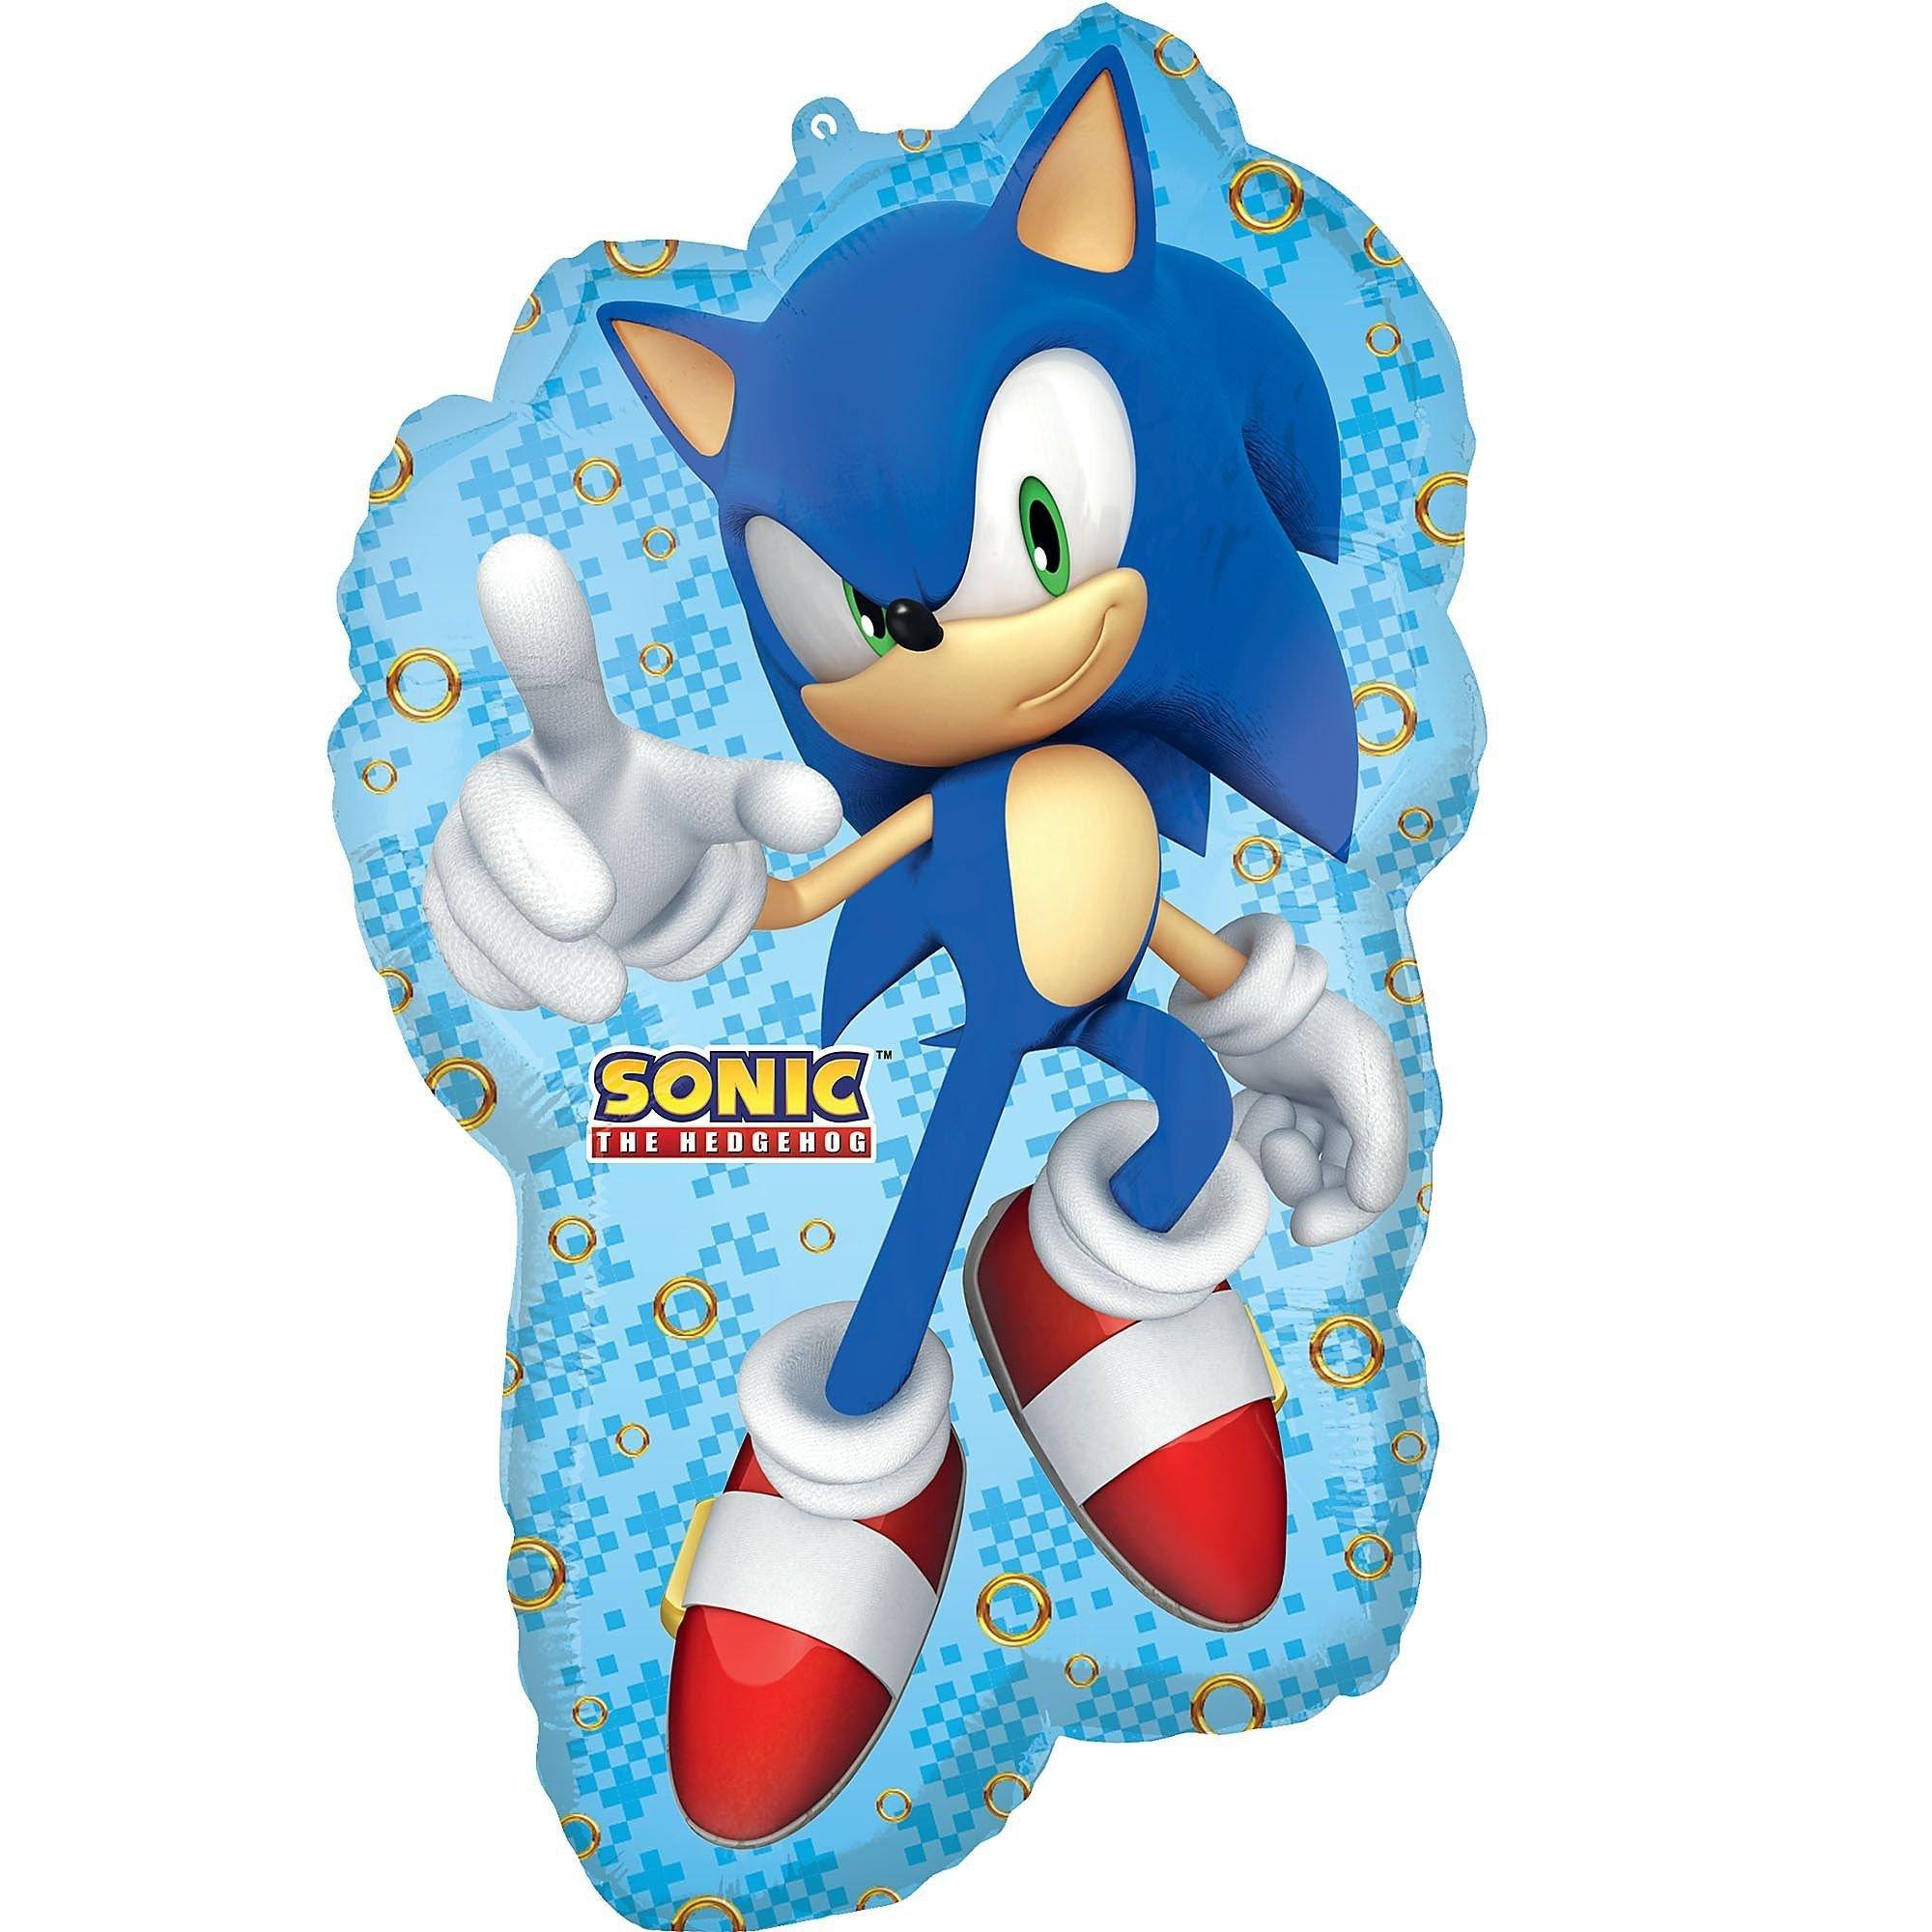 Premium Sonic the Hedgehog 2 Foil Balloon Bouquet with Balloon Weight, 13pc